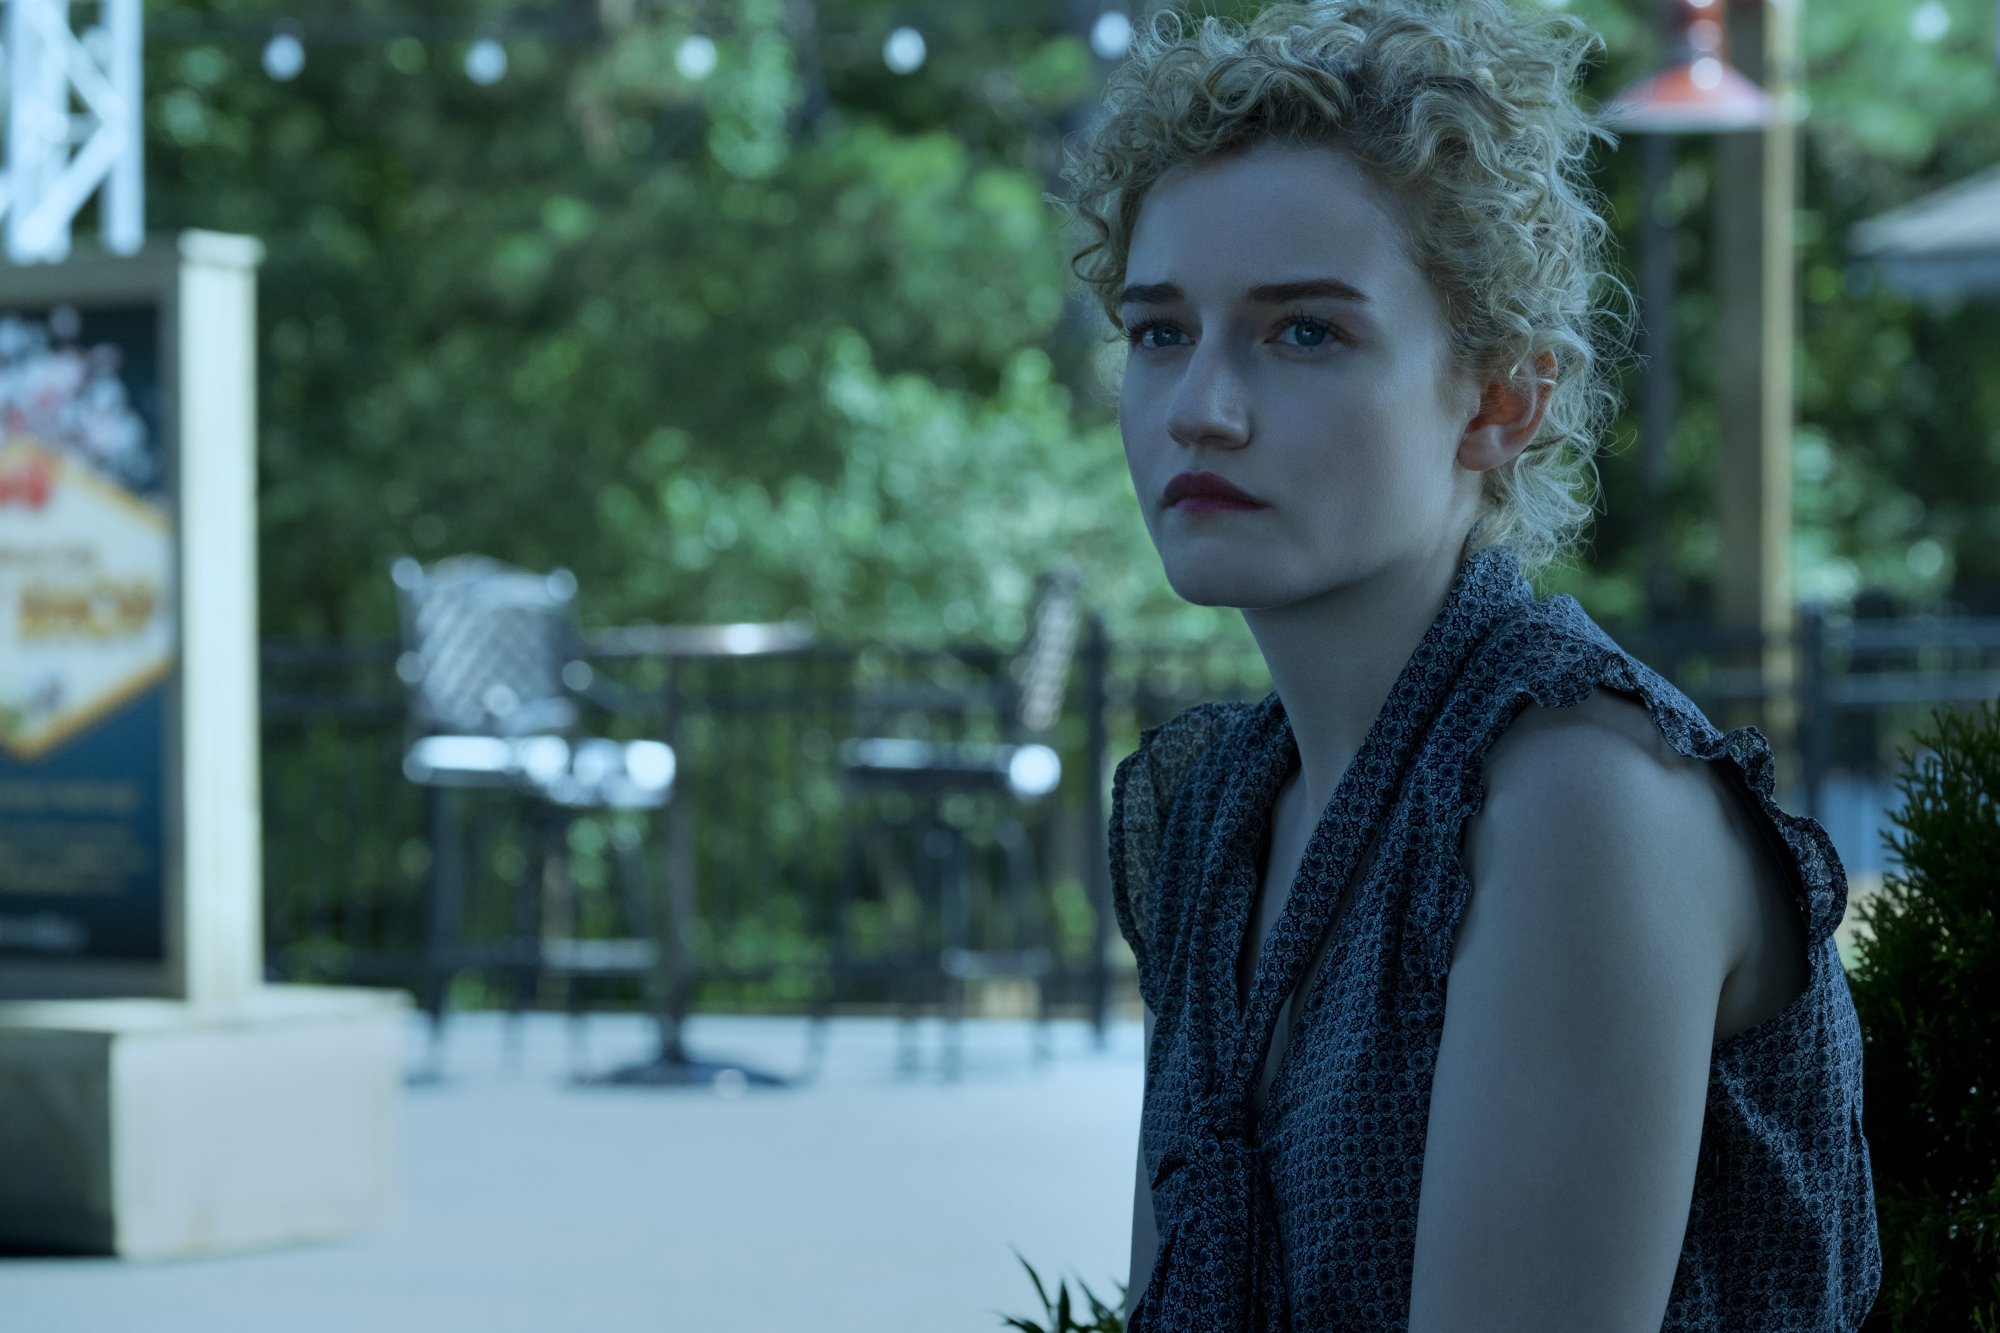 Julia Garner as Ruth Langmore in 'Ozark' Season 3. She's sitting on a bench and staring at something off-screen. There are trees behind her.